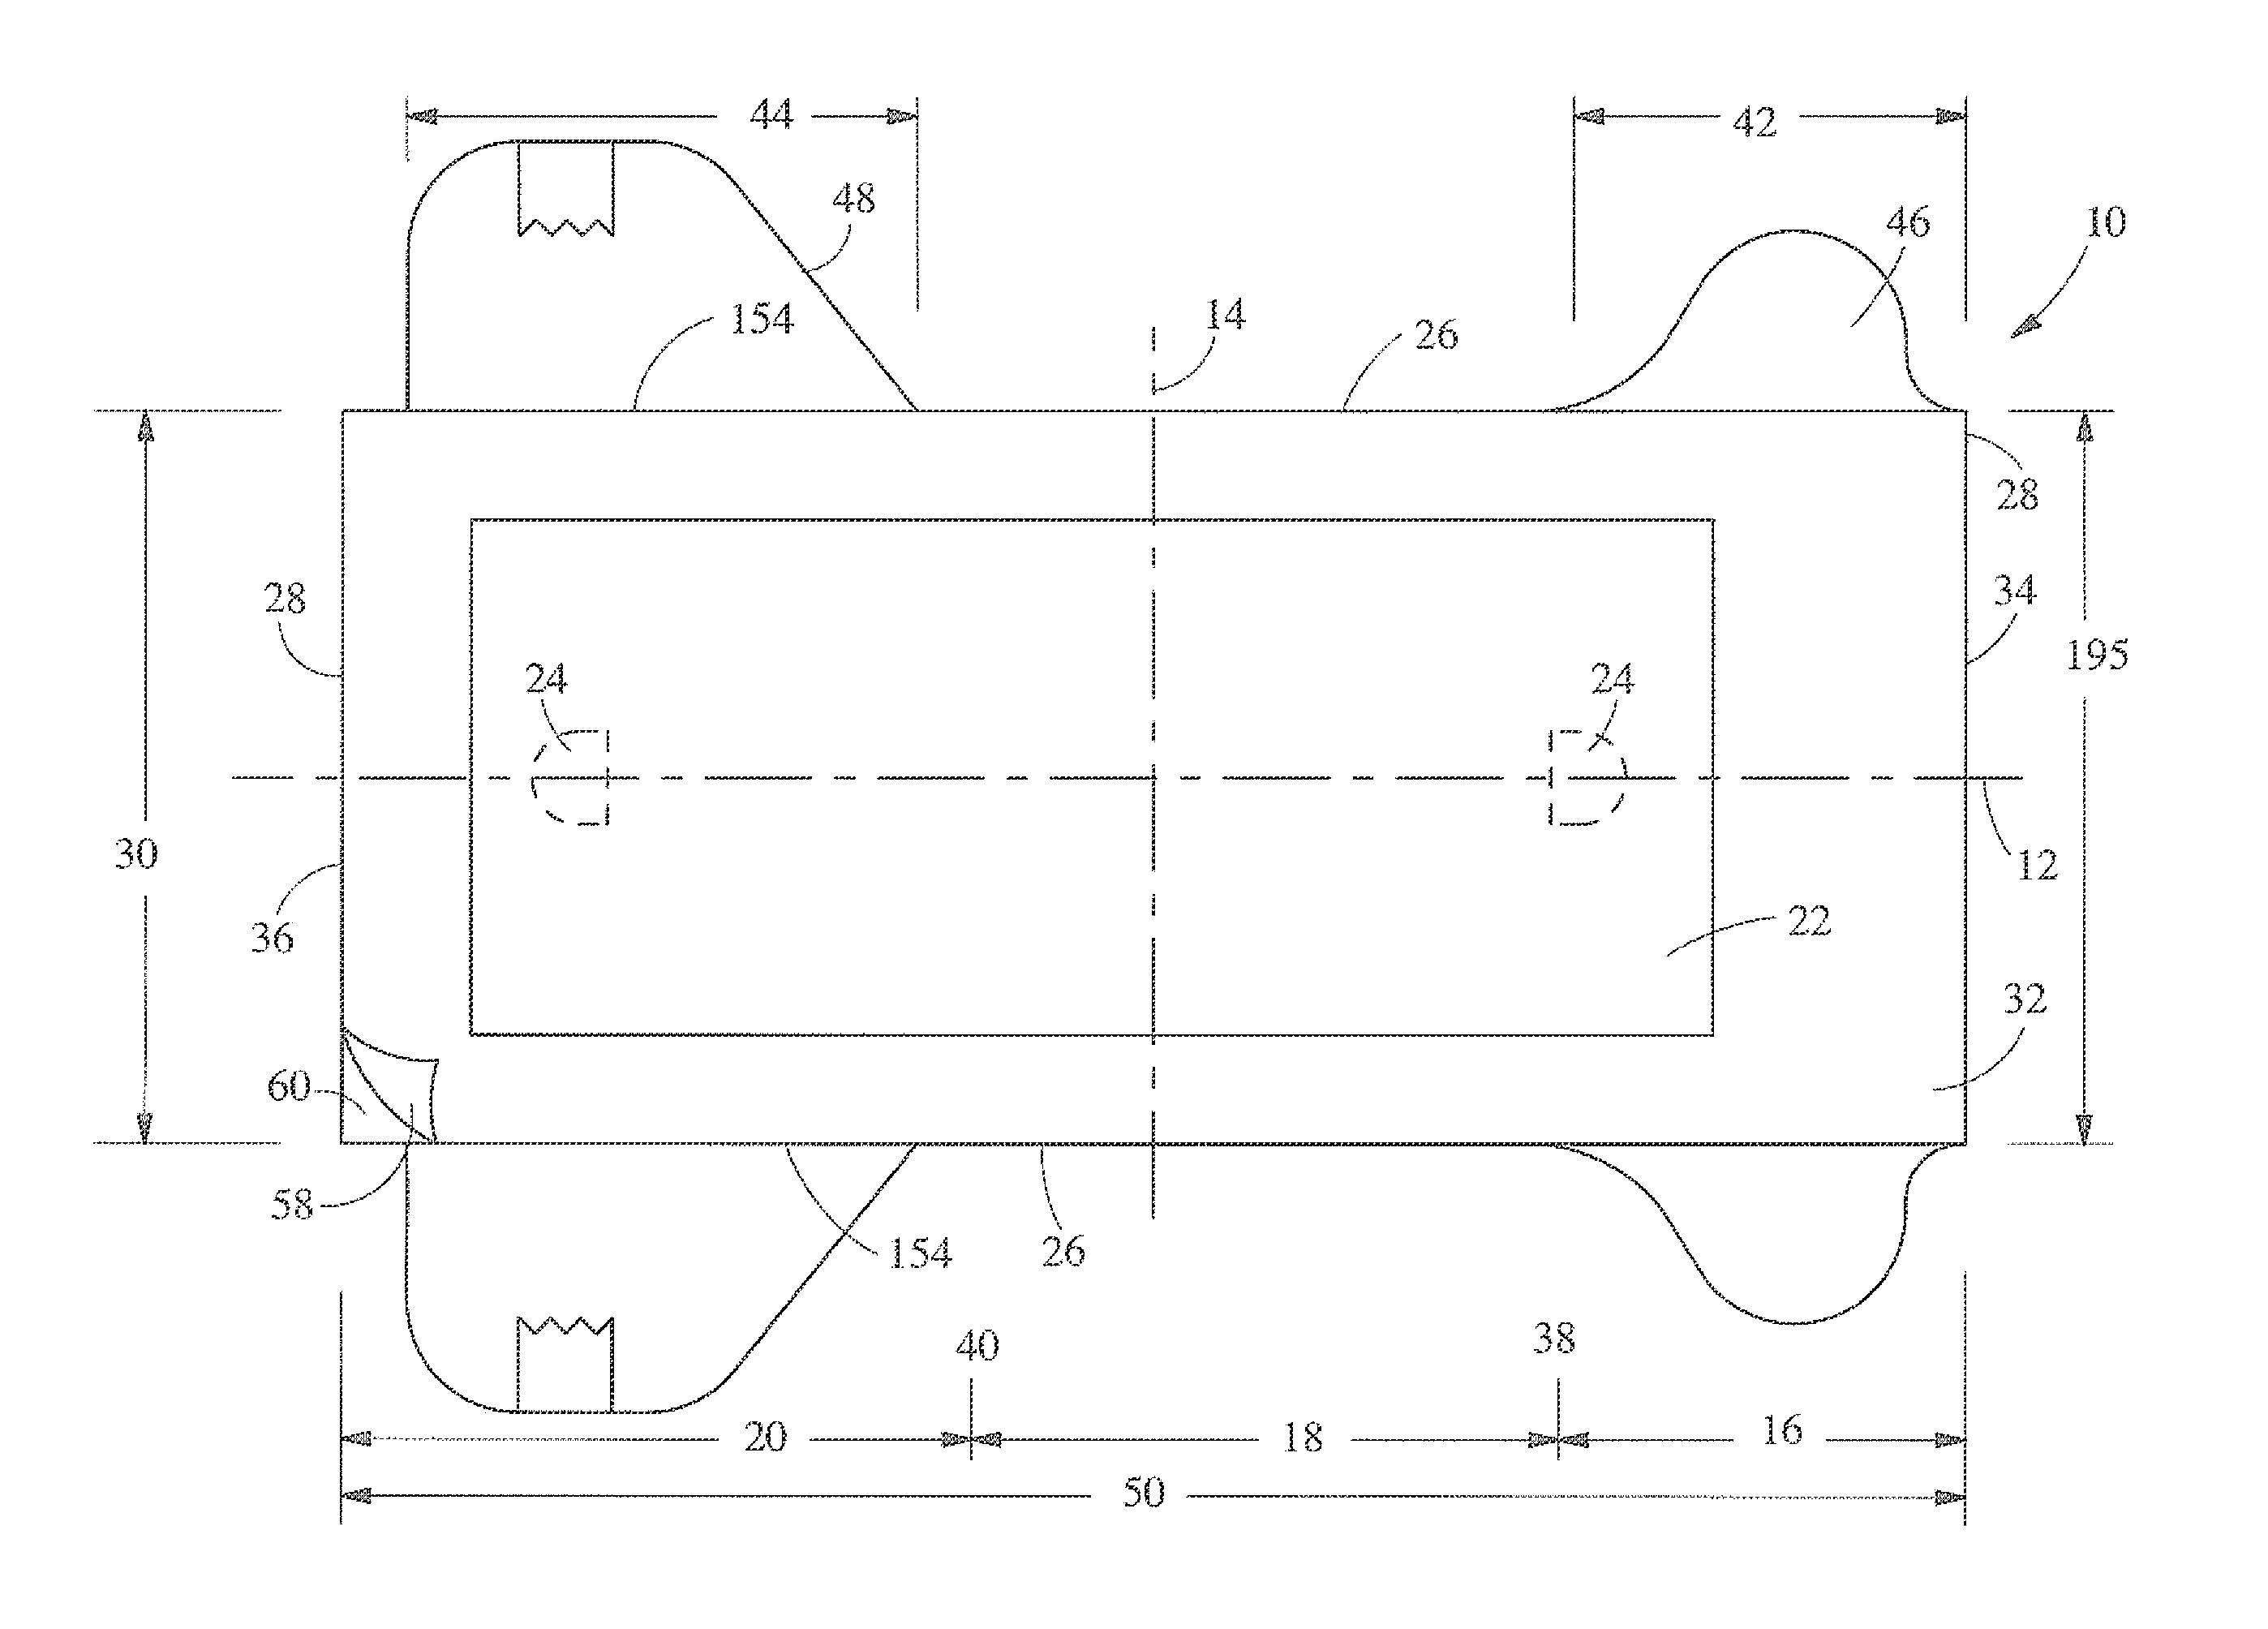 Reusable outer cover for an absorbent article having zones of varying properties